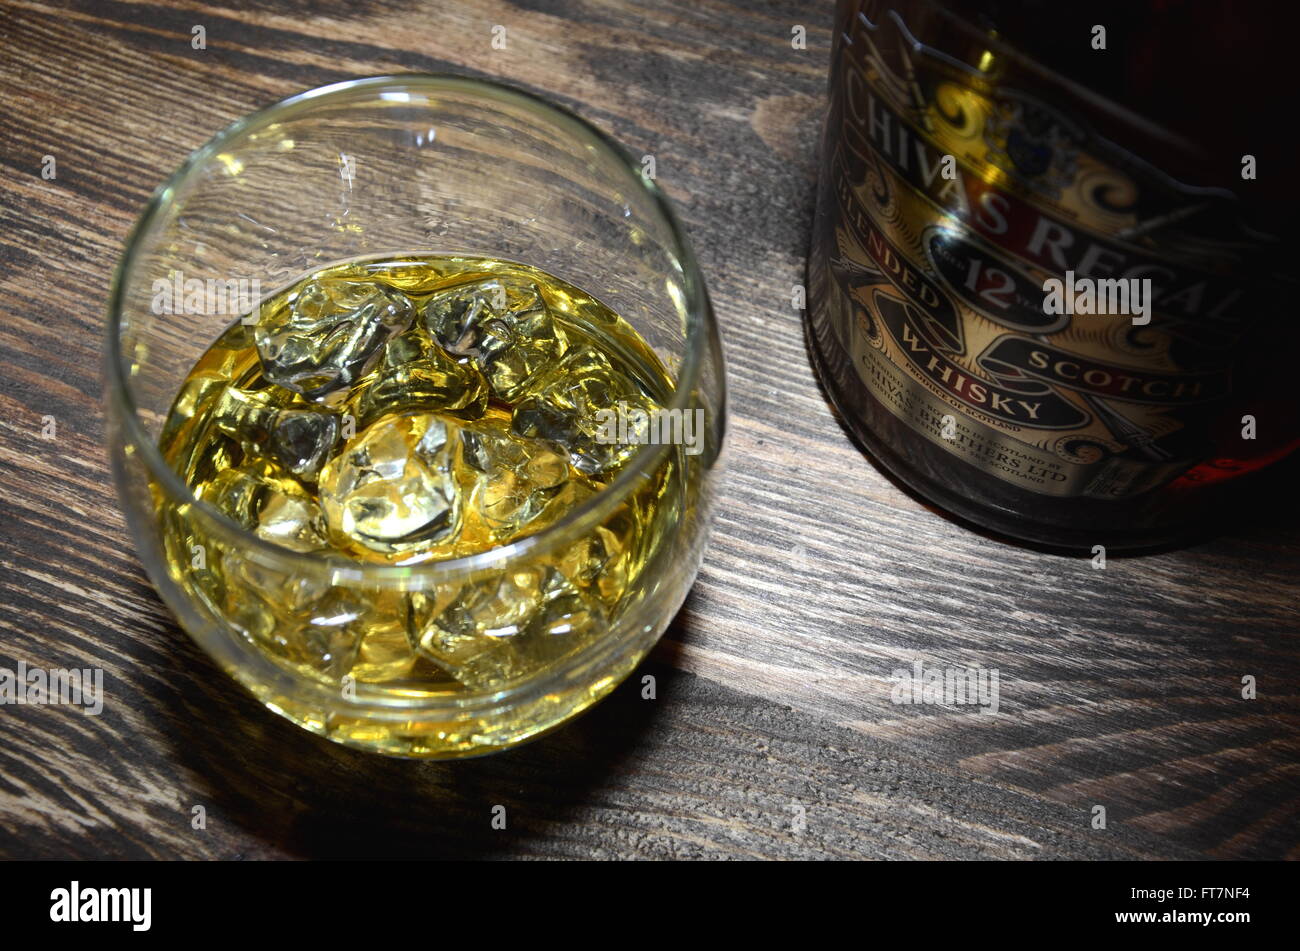 Glass of Chivas Regal whisky on wooden table Stock Photo - Alamy